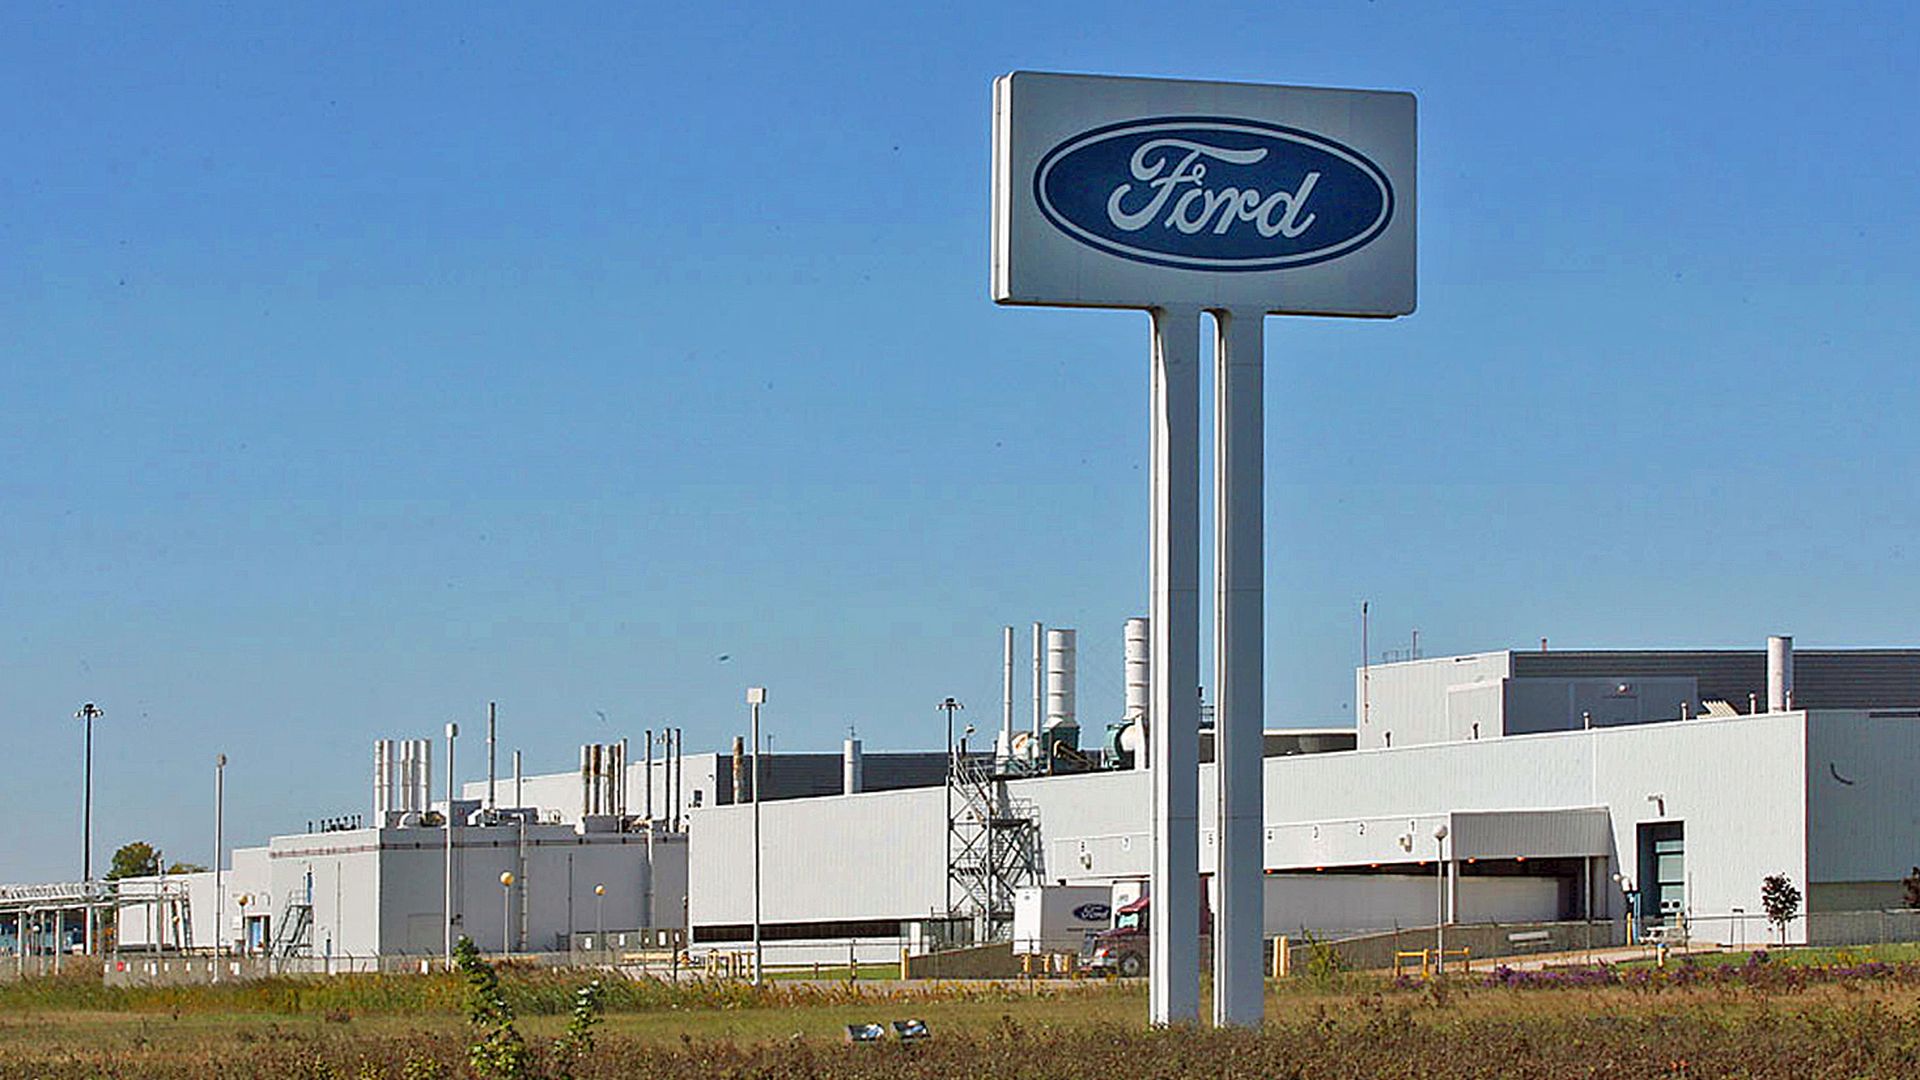 A photo of Ford's engine plant in Essex, Ontario 